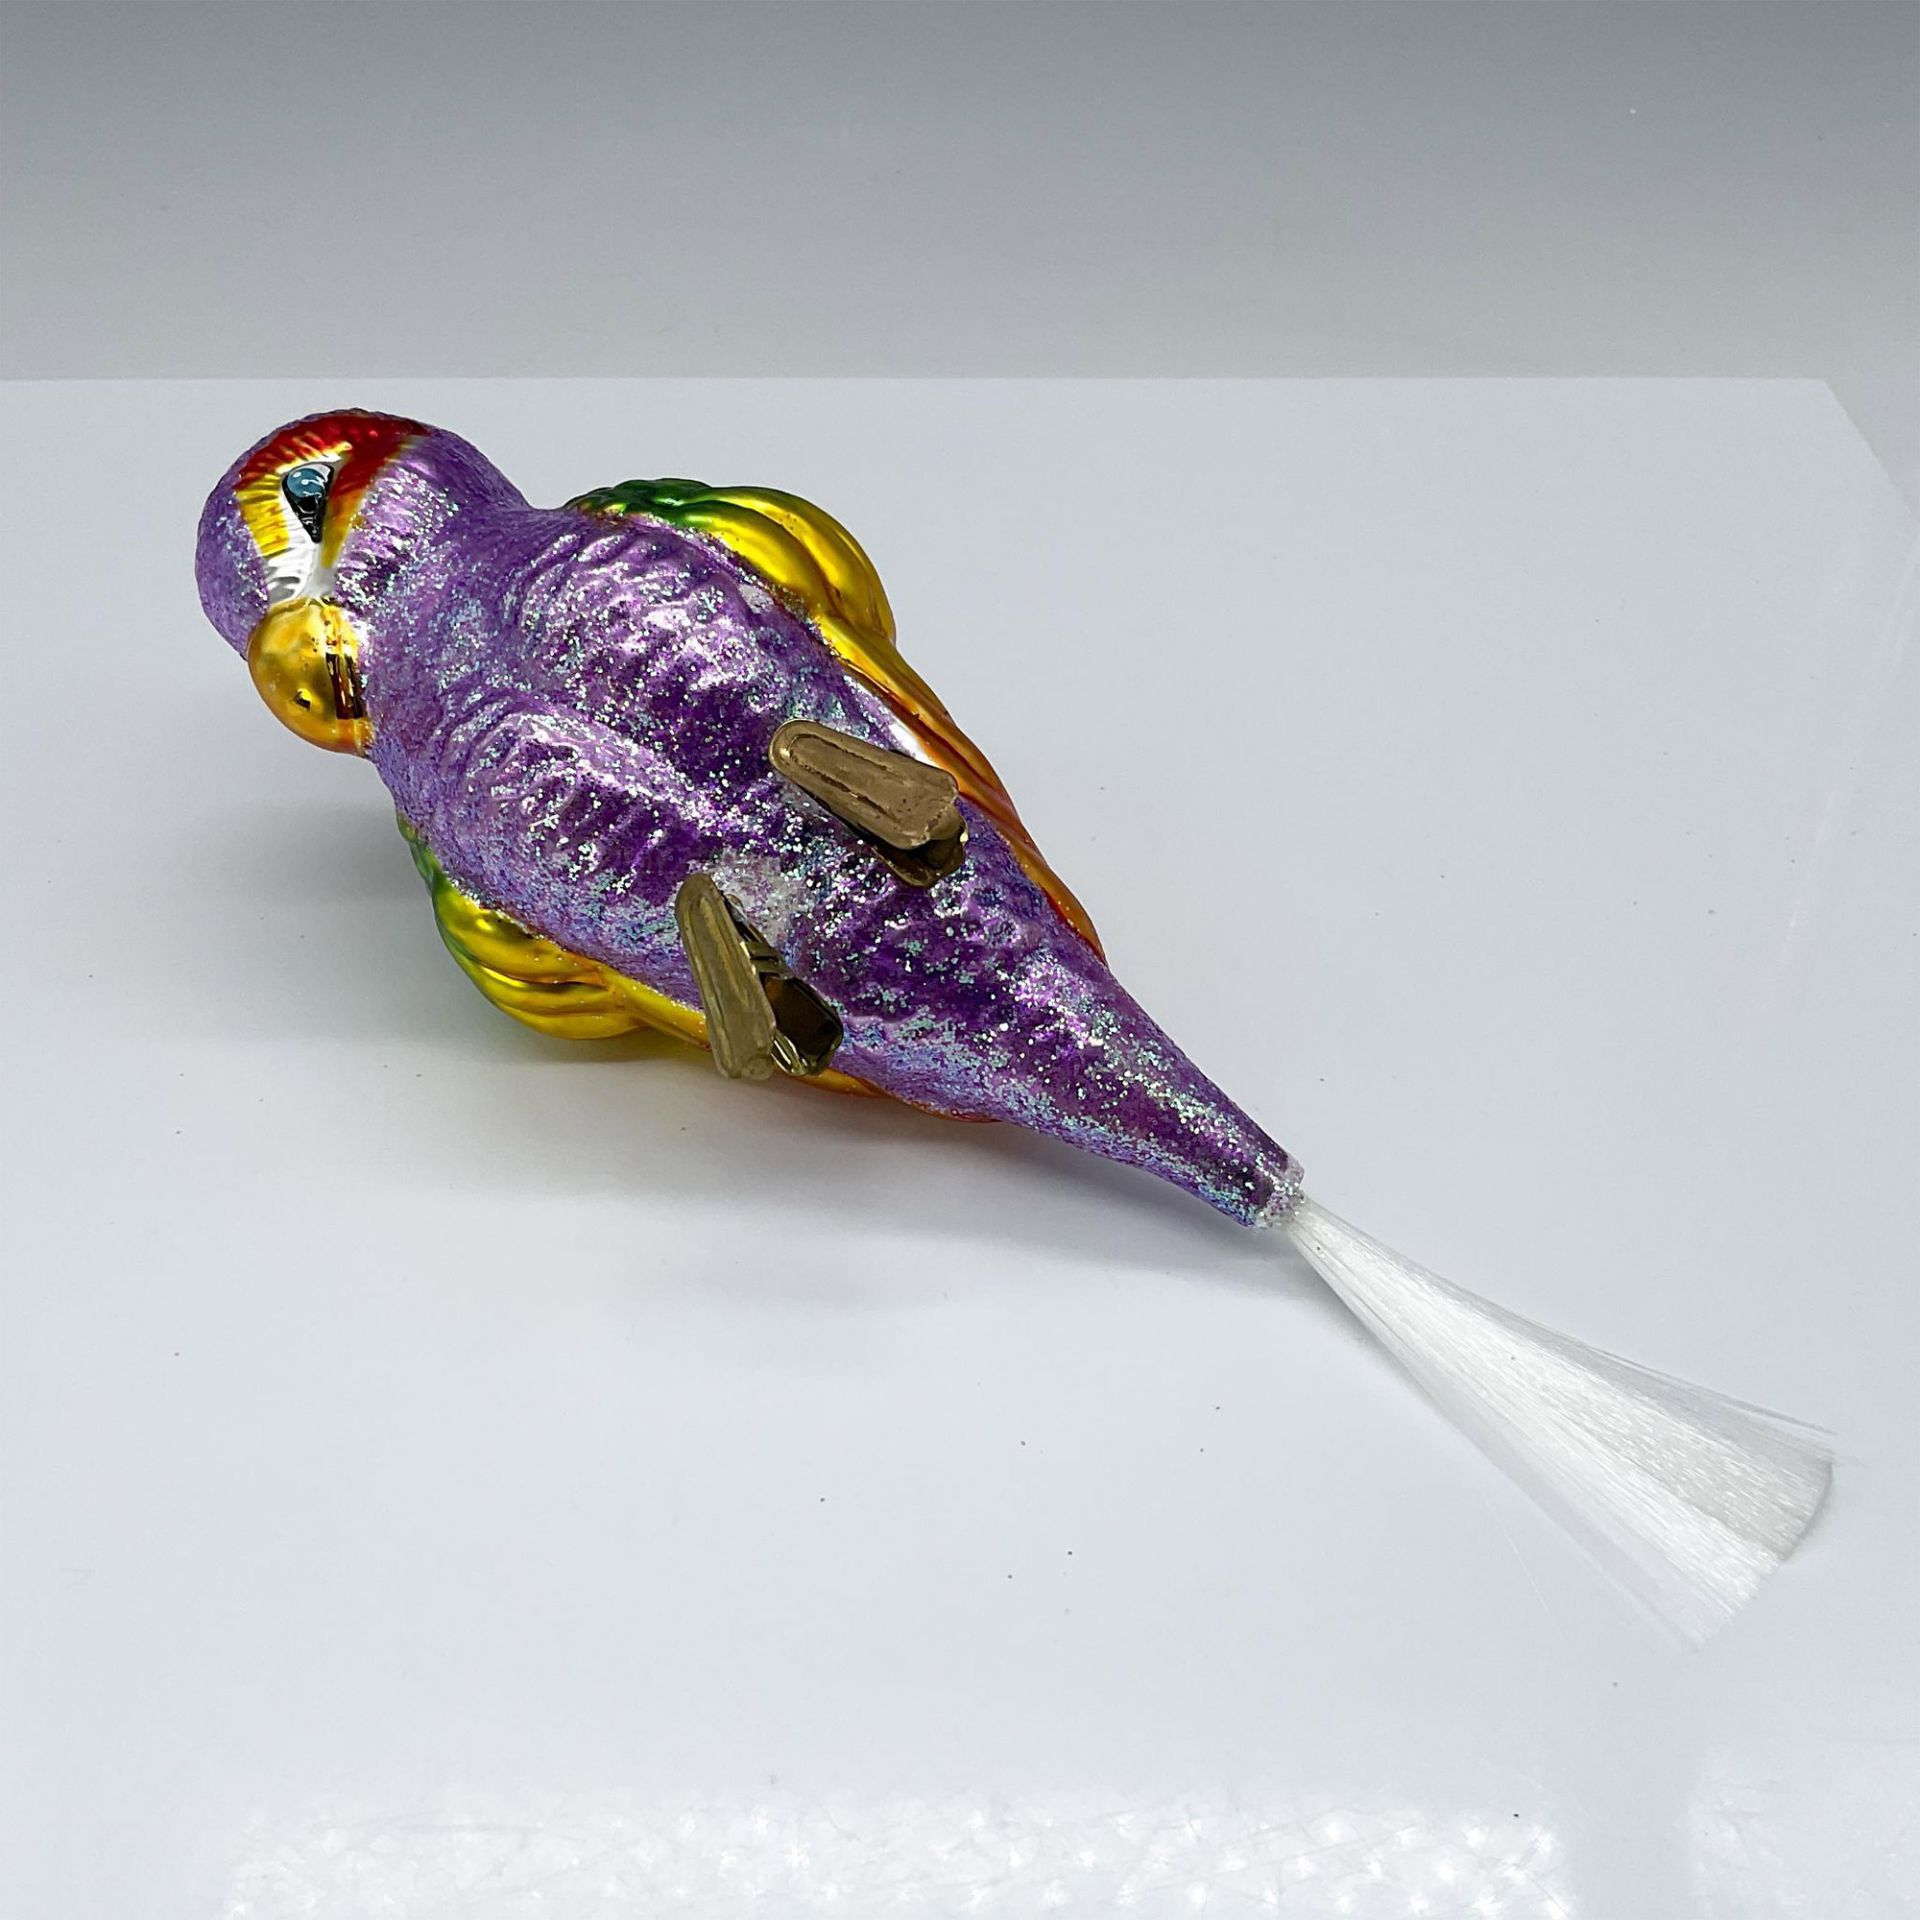 Christopher Radko Polly Wanna Parrot Ornament - Image 3 of 3